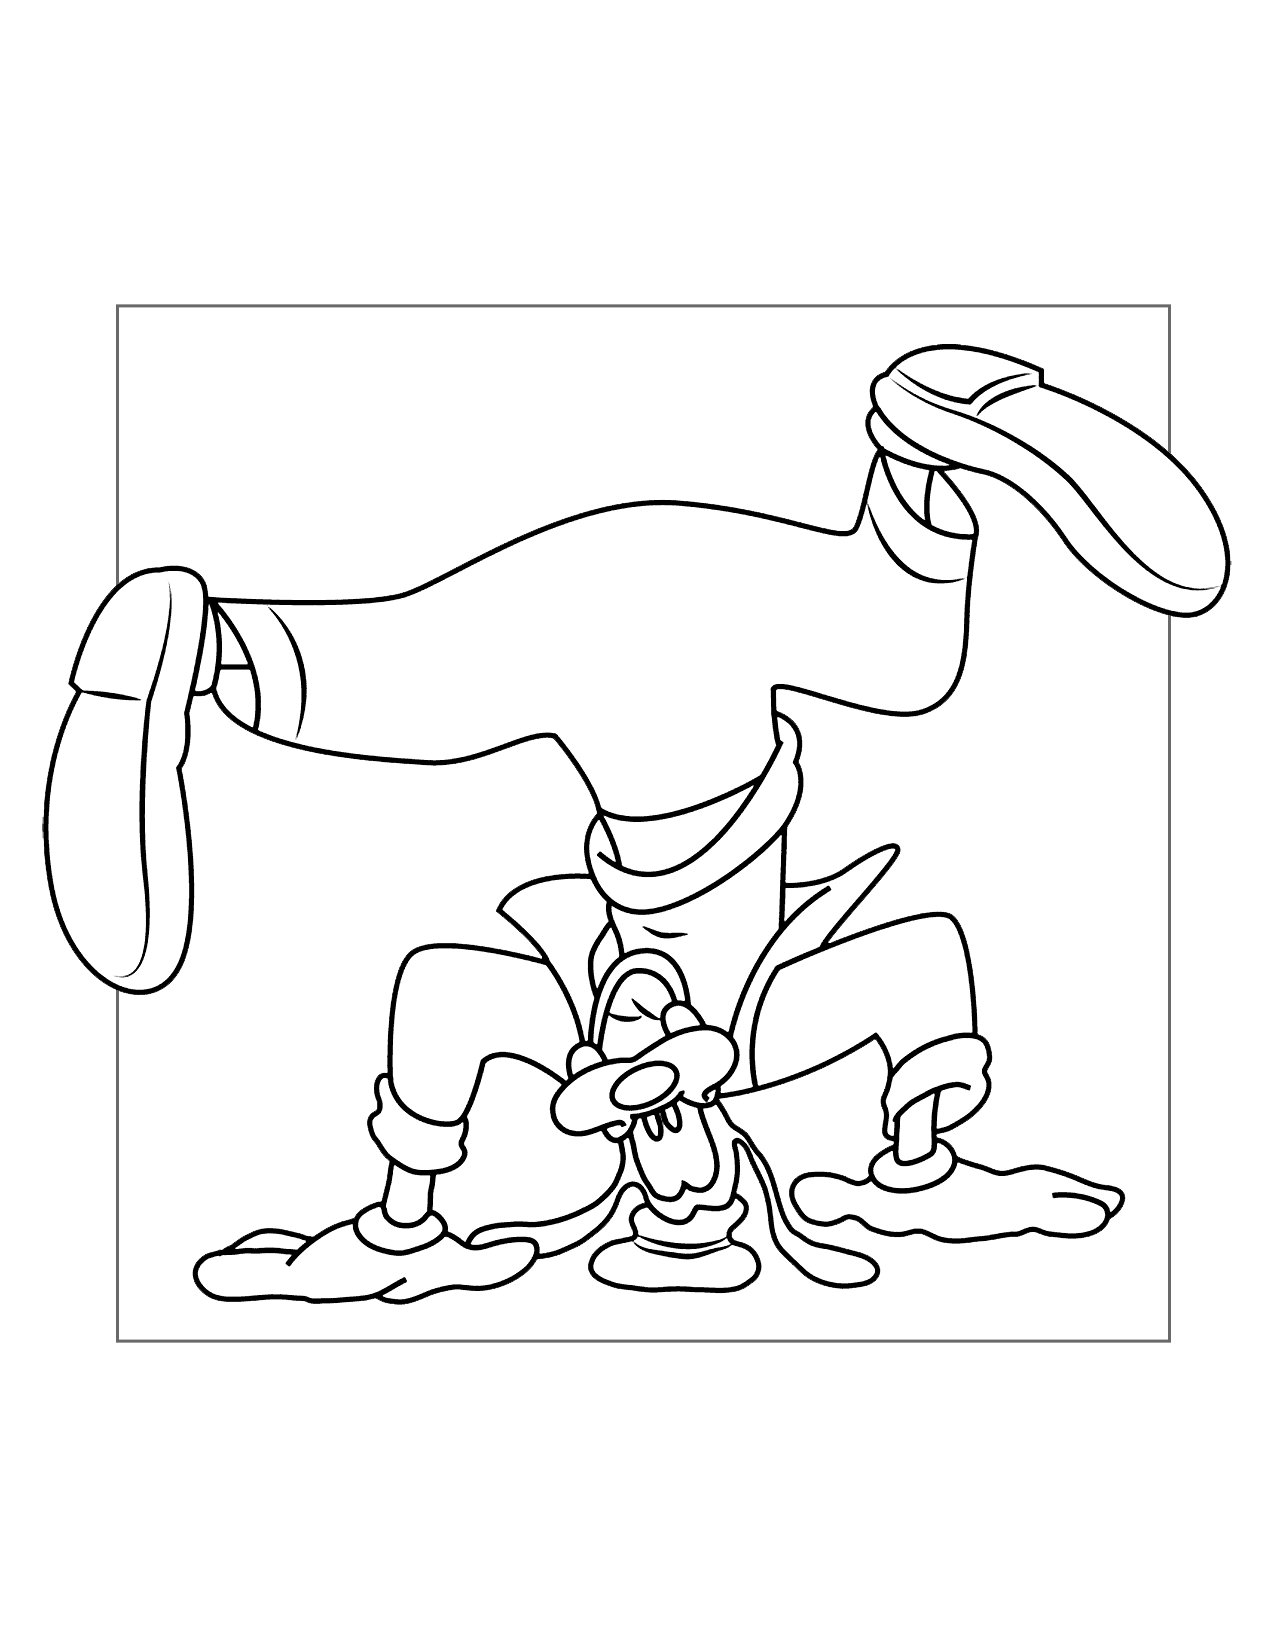 Goofy Is Upside Down Coloring Page